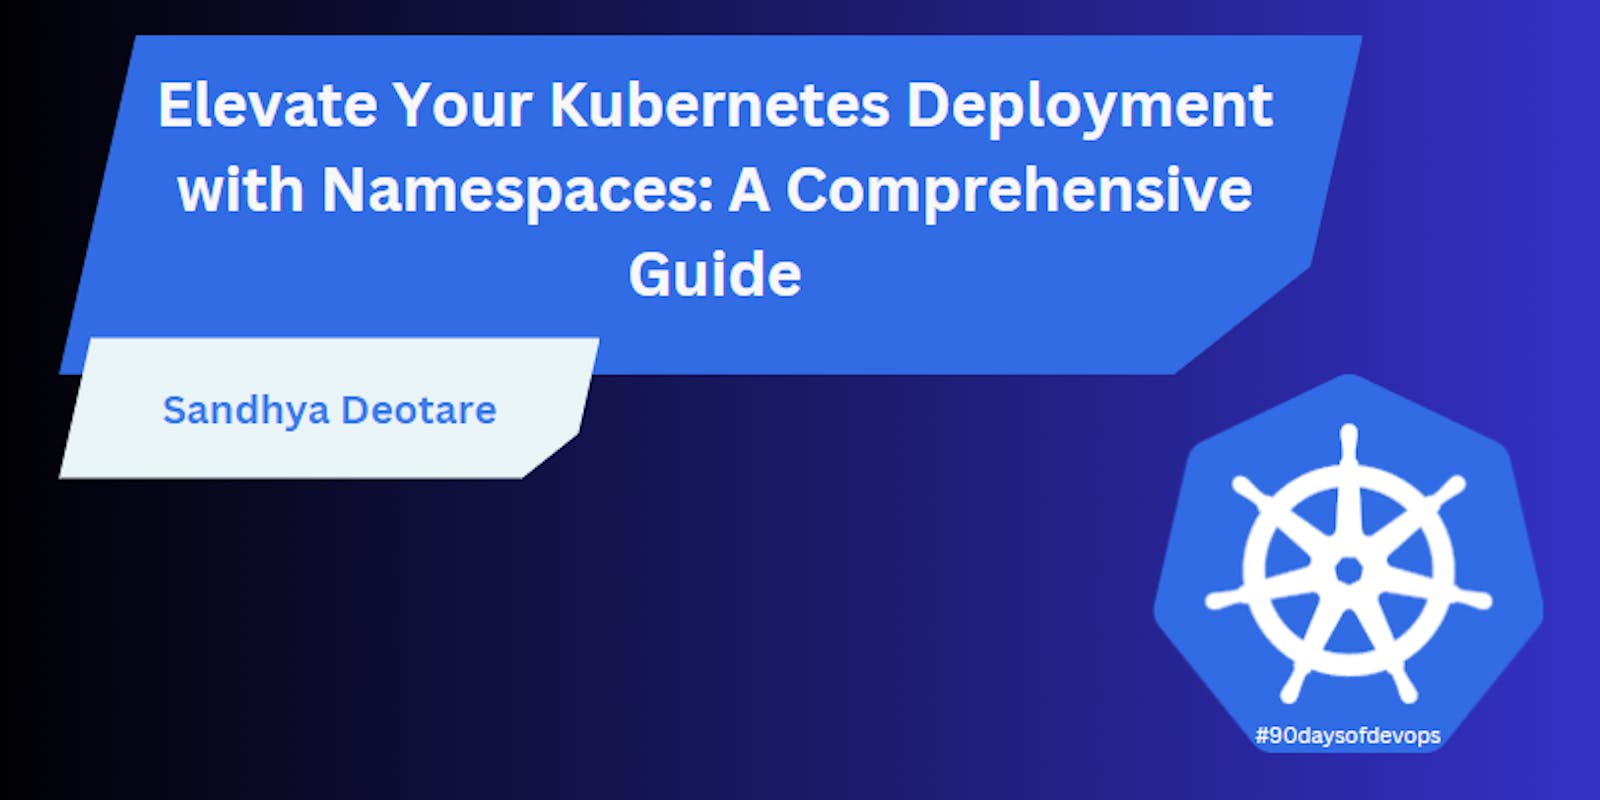 Elevate Your Kubernetes Deployment with Namespaces: A Comprehensive Guide 🚀